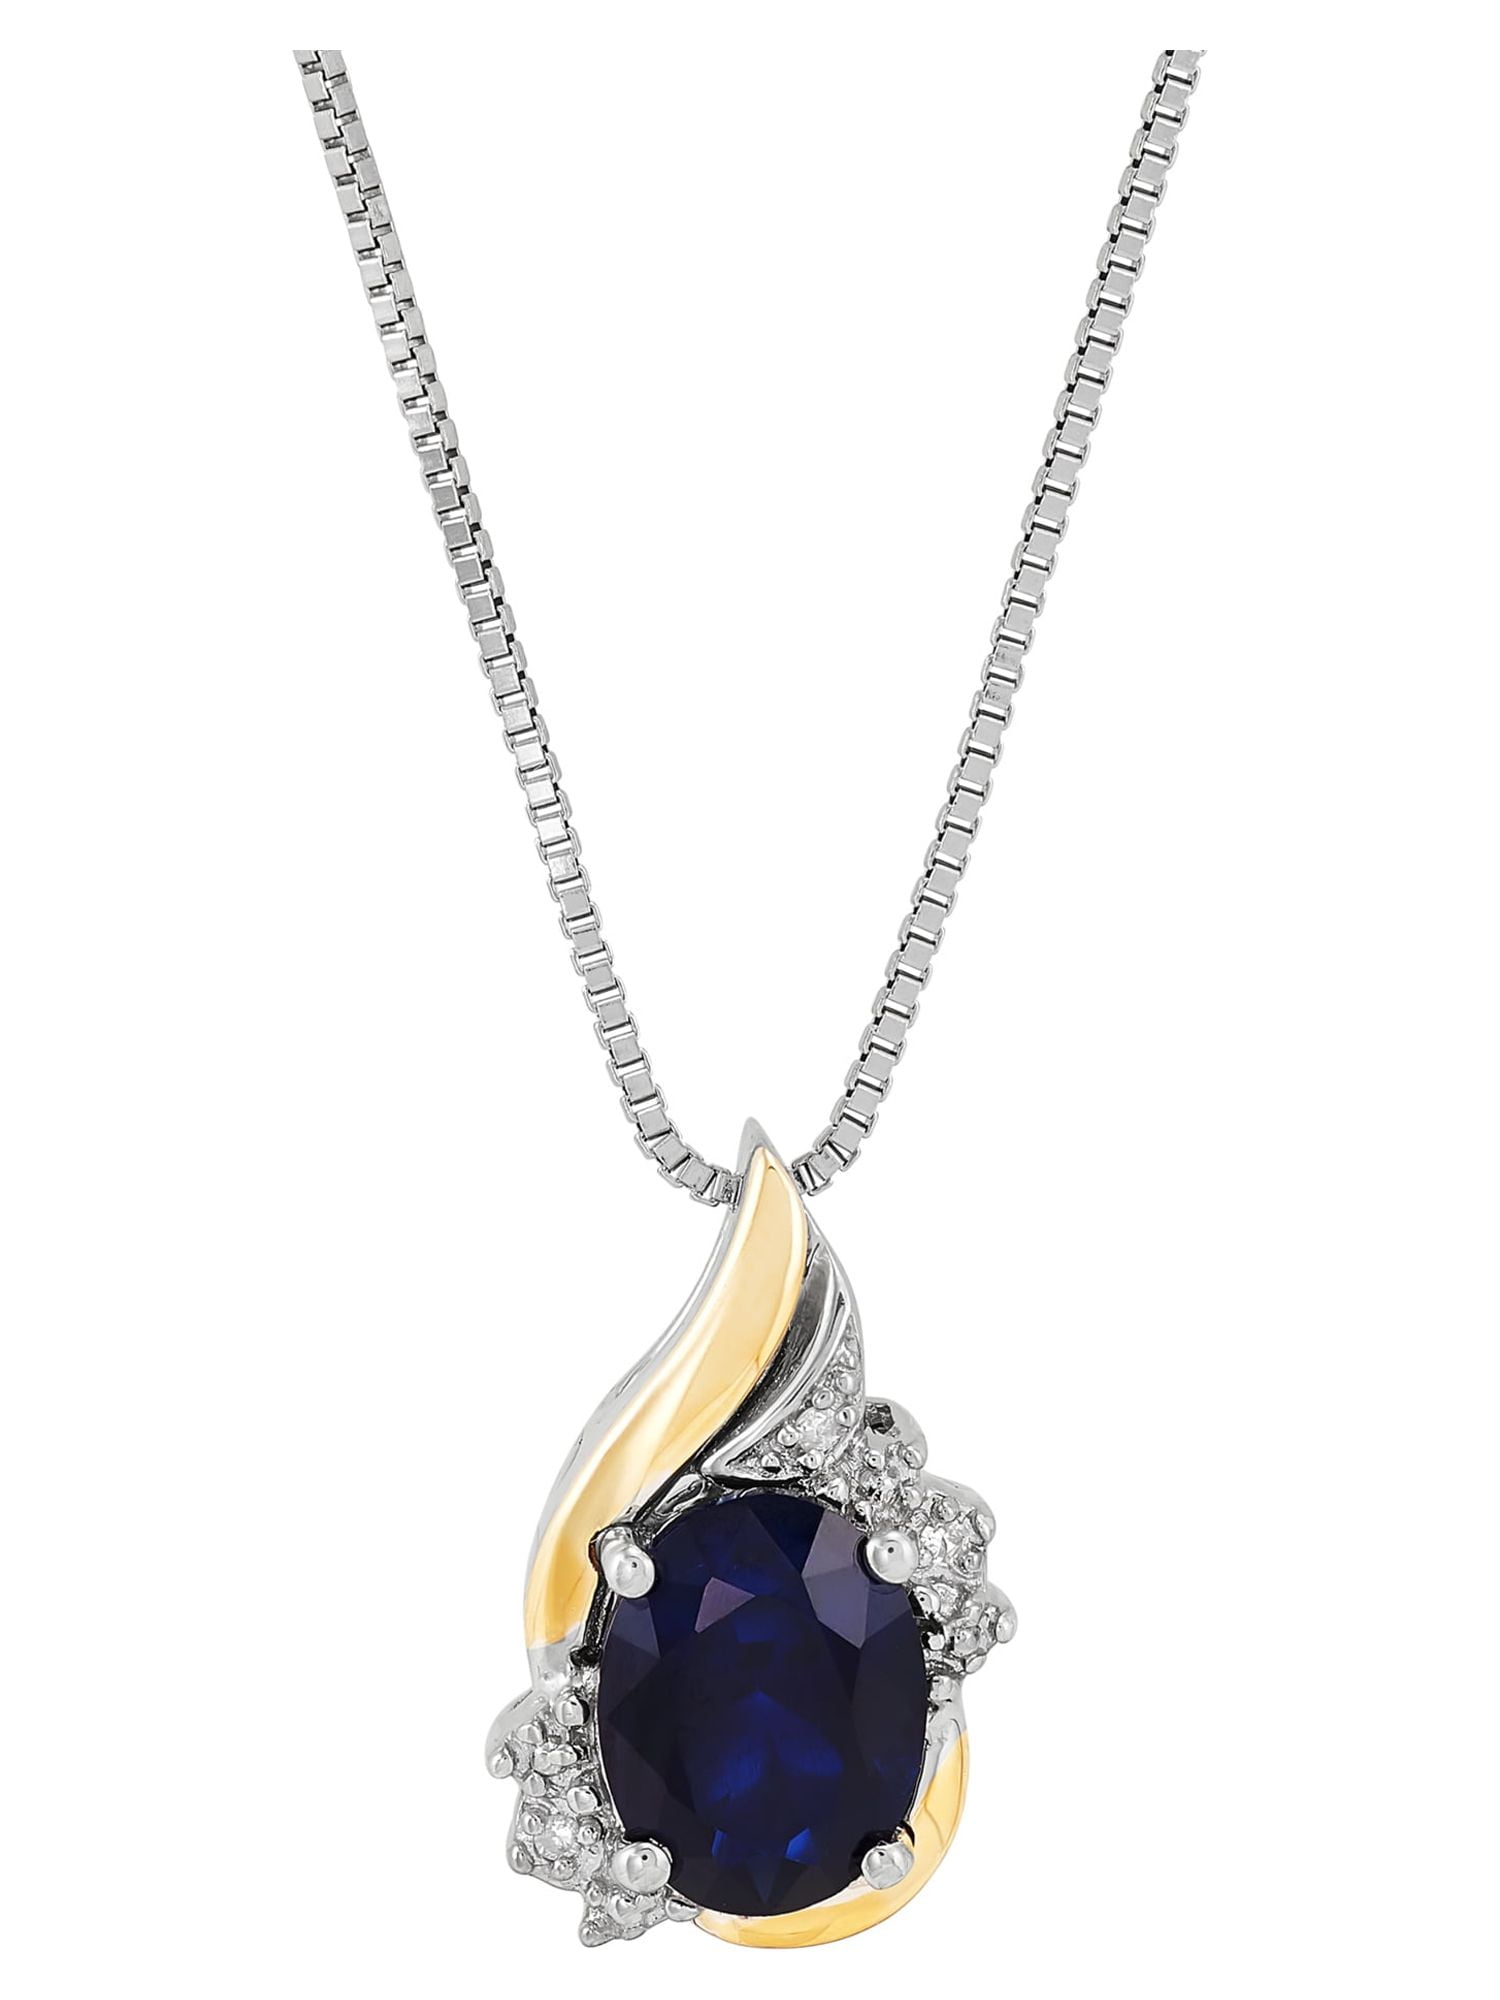 Sapphire and Diamond Necklace in 14Kt Yellow Gold - Morgan's Treasure